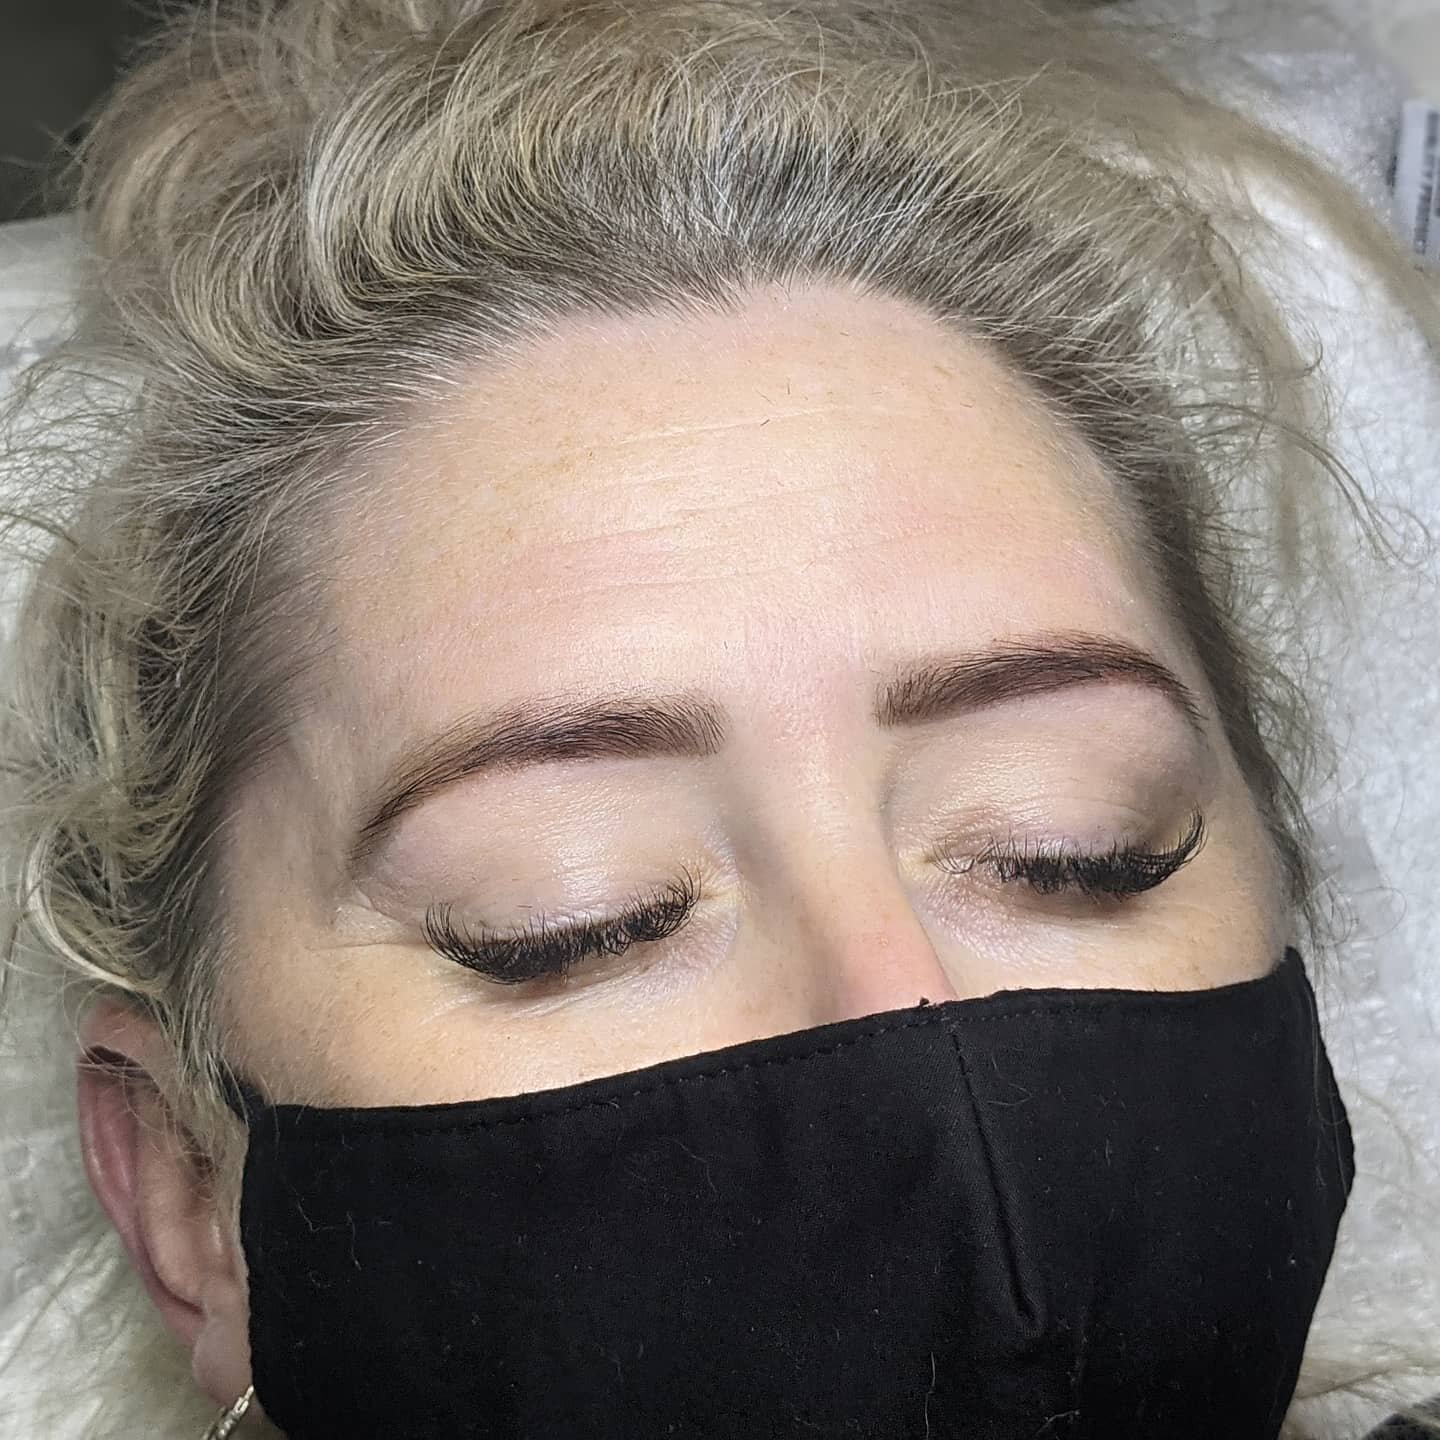 Fresh Brows for this blonde bombshell 💛